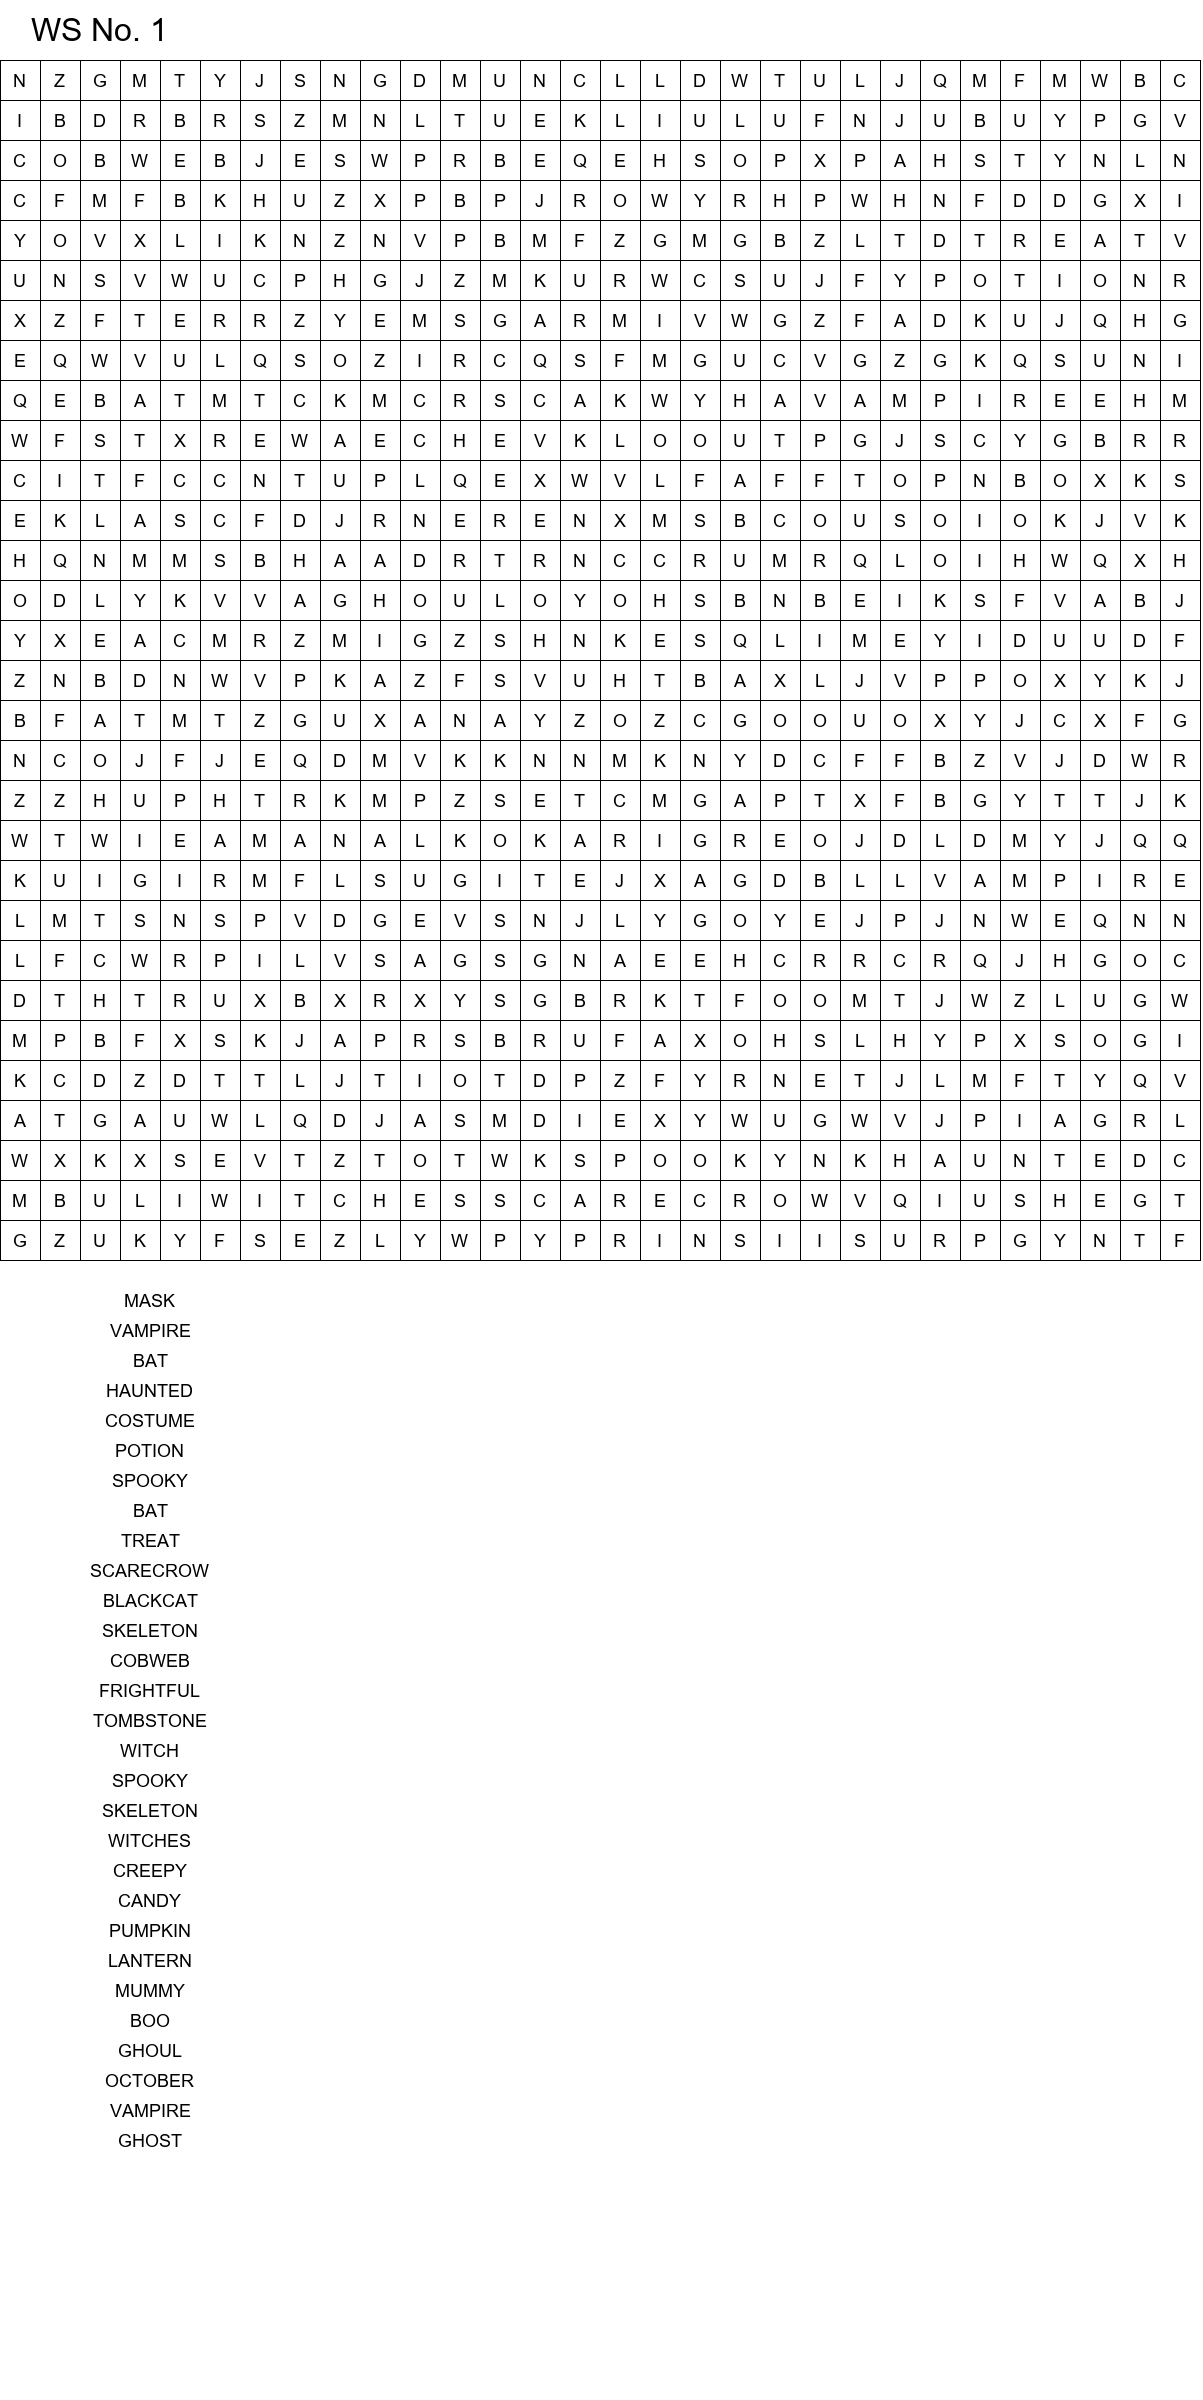 Challenging Halloween word search for adults size 30x30 No 1